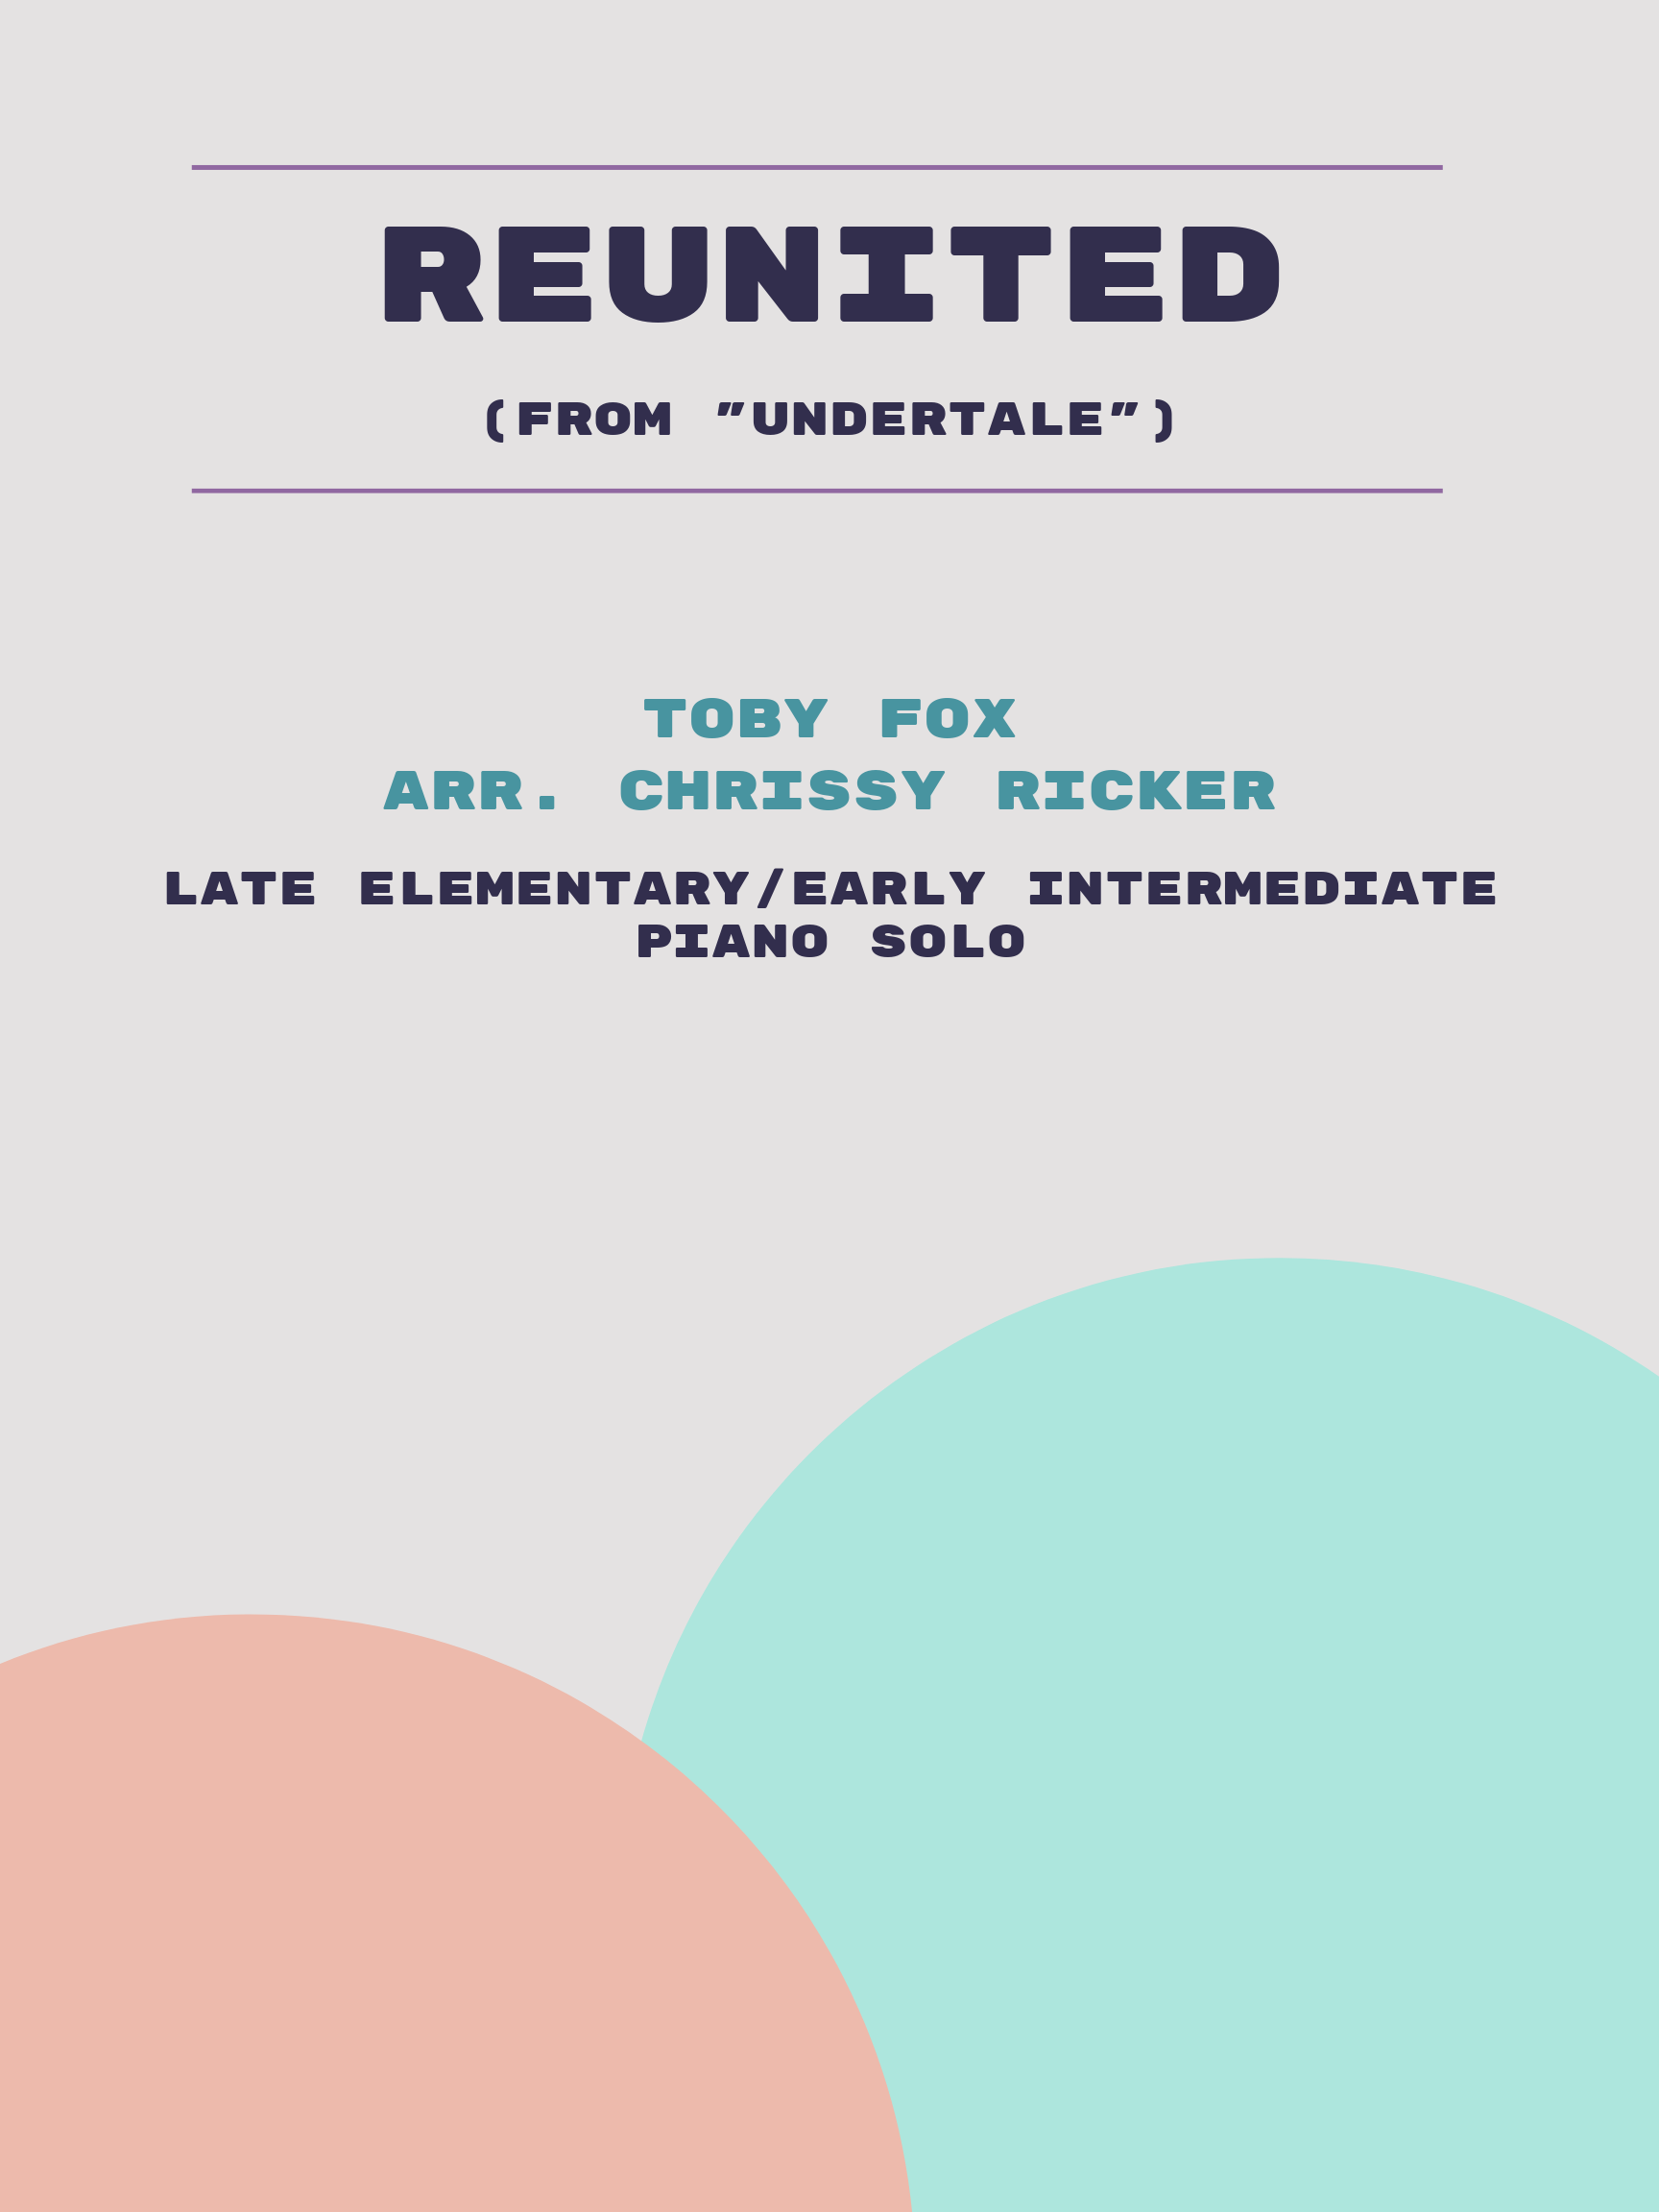 Reunited by Toby Fox